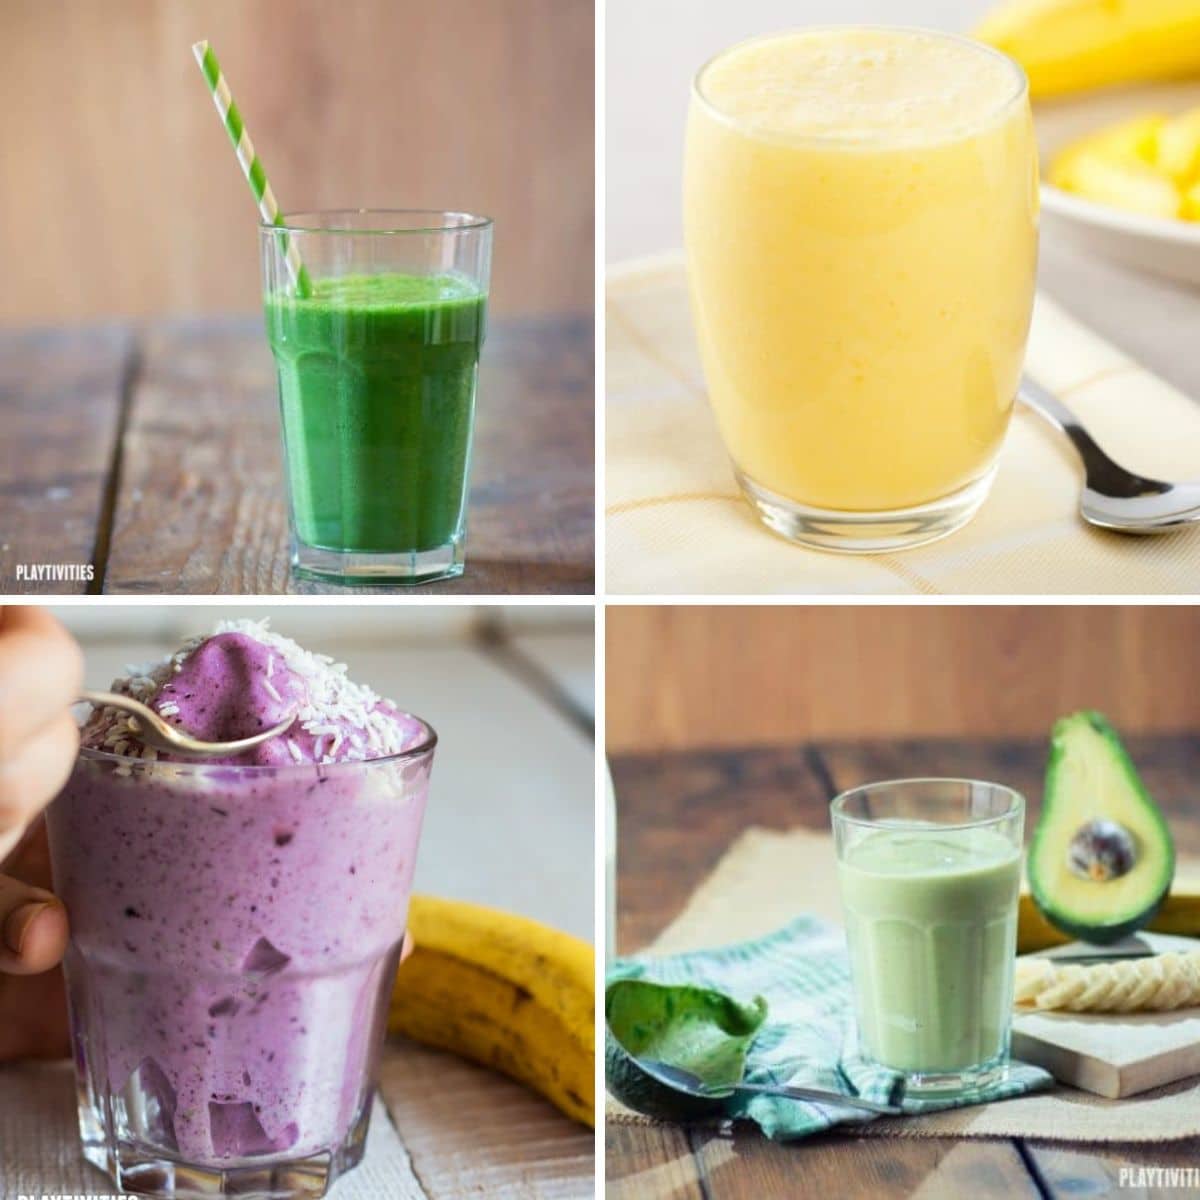 4 images of smoothies for kids.